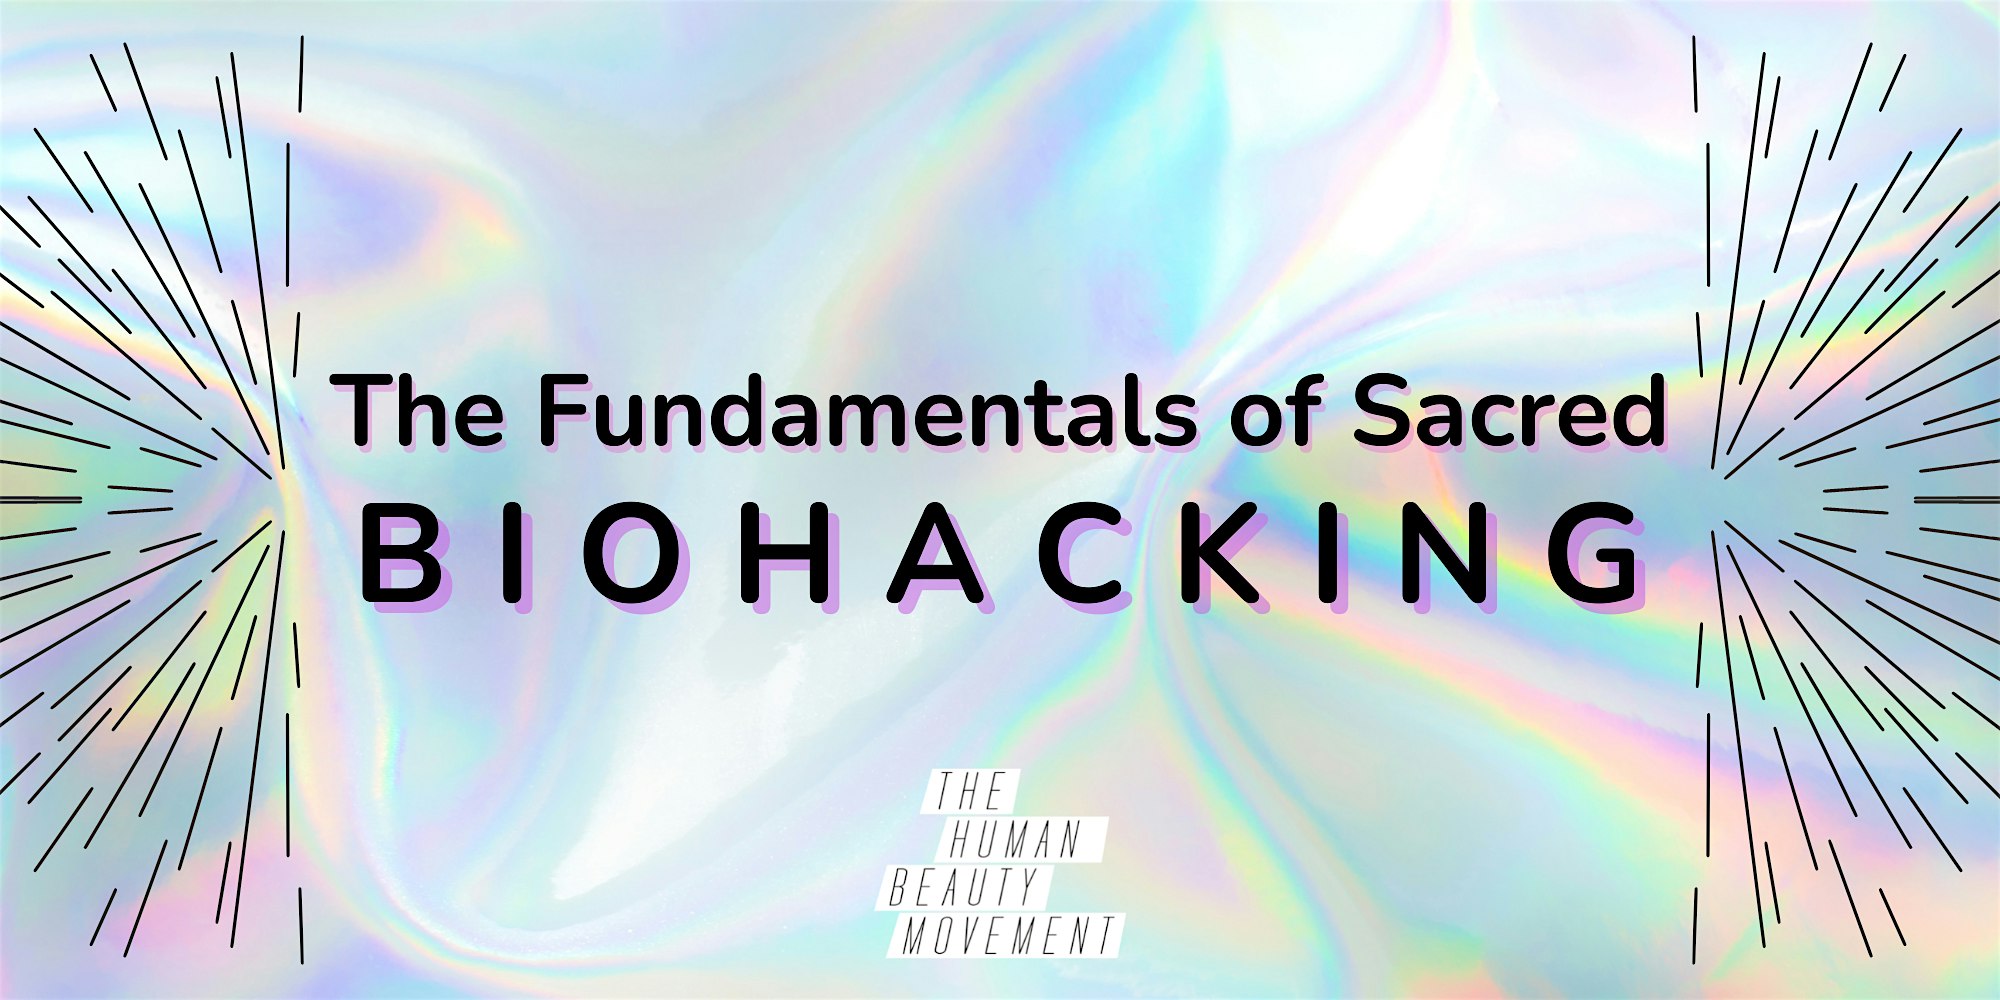 The Fundamentals of Sacred Biohacking